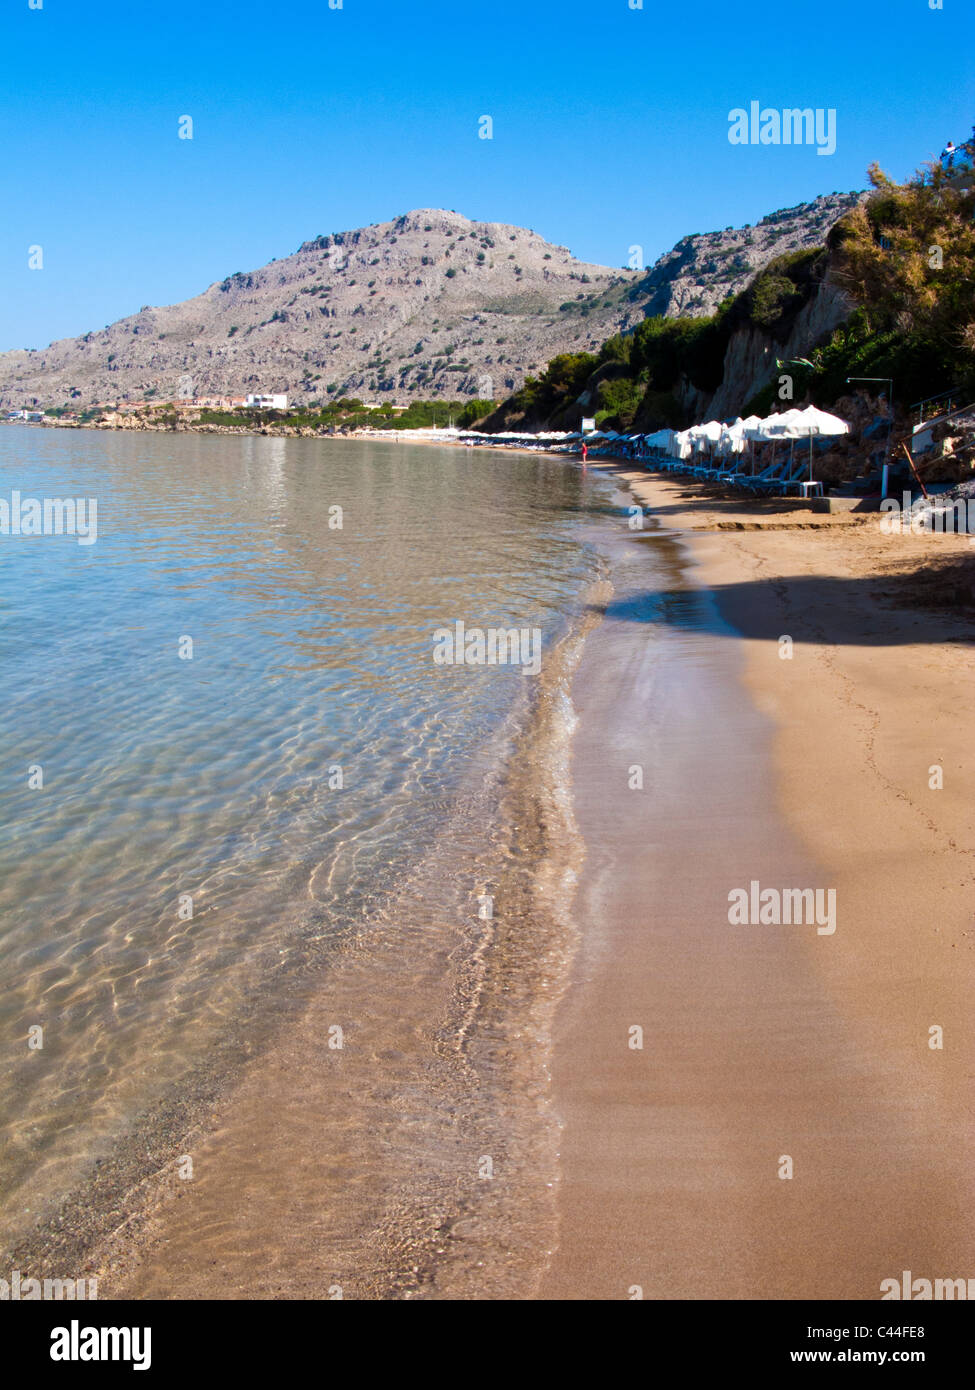 SELECTIVE FOCUS IMAGE OF SHALLOW SEA IN PEFKOS RHODES GREECE Stock Photo